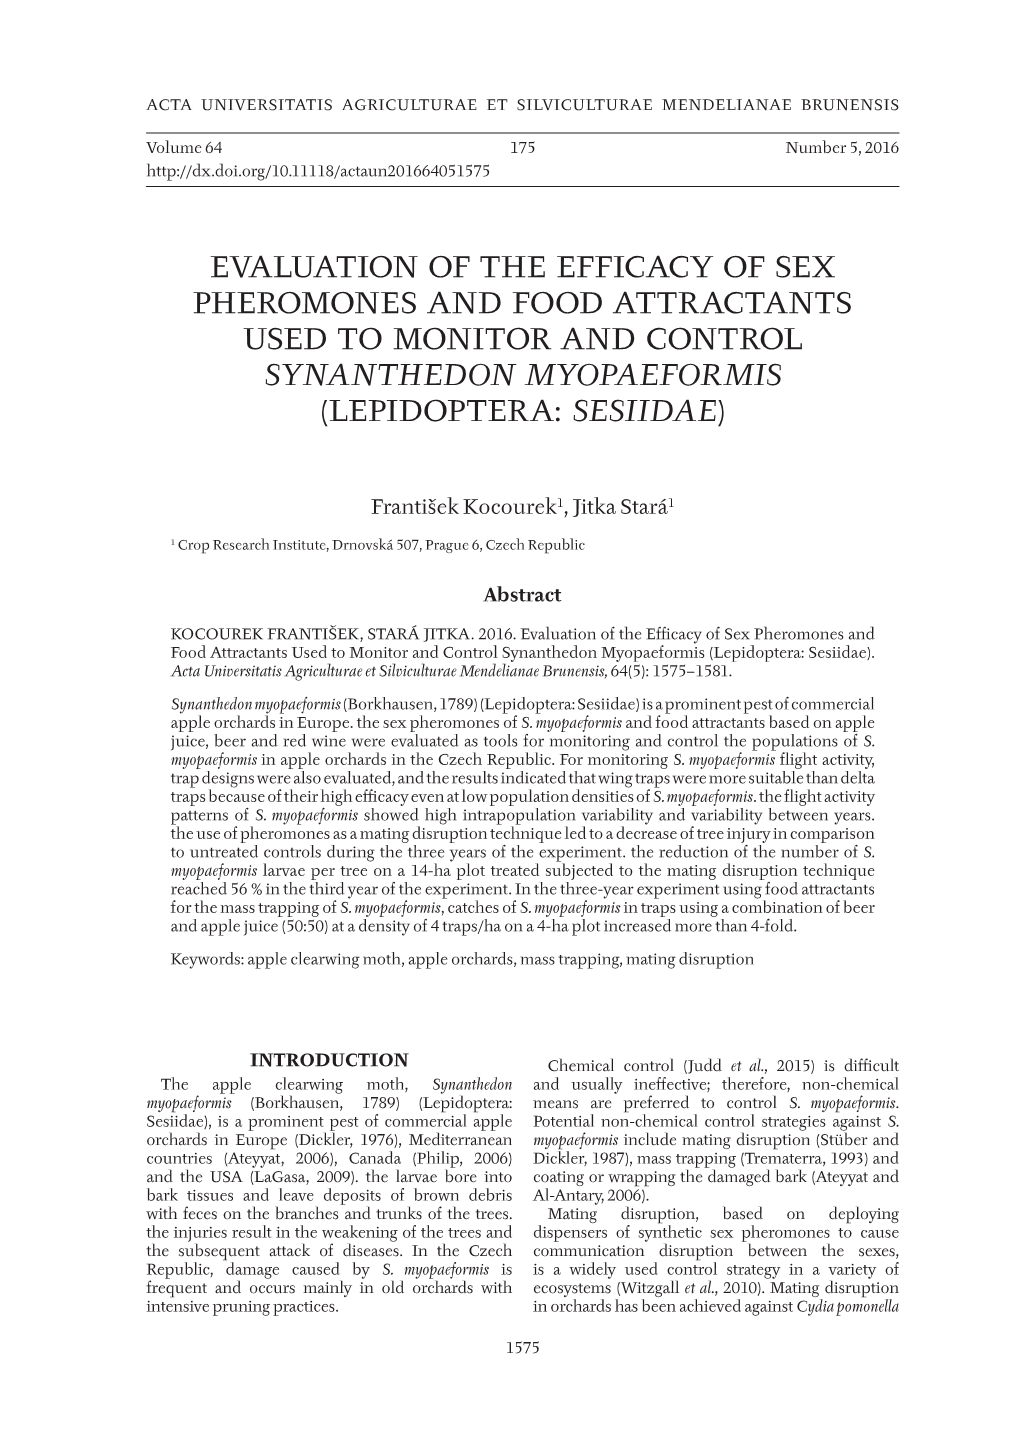 Evaluation of the Efficacy of Sex Pheromones and Food Attractants Used to Monitor and Control Synanthedon Myopaeformis (Lepidoptera: Sesiidae)